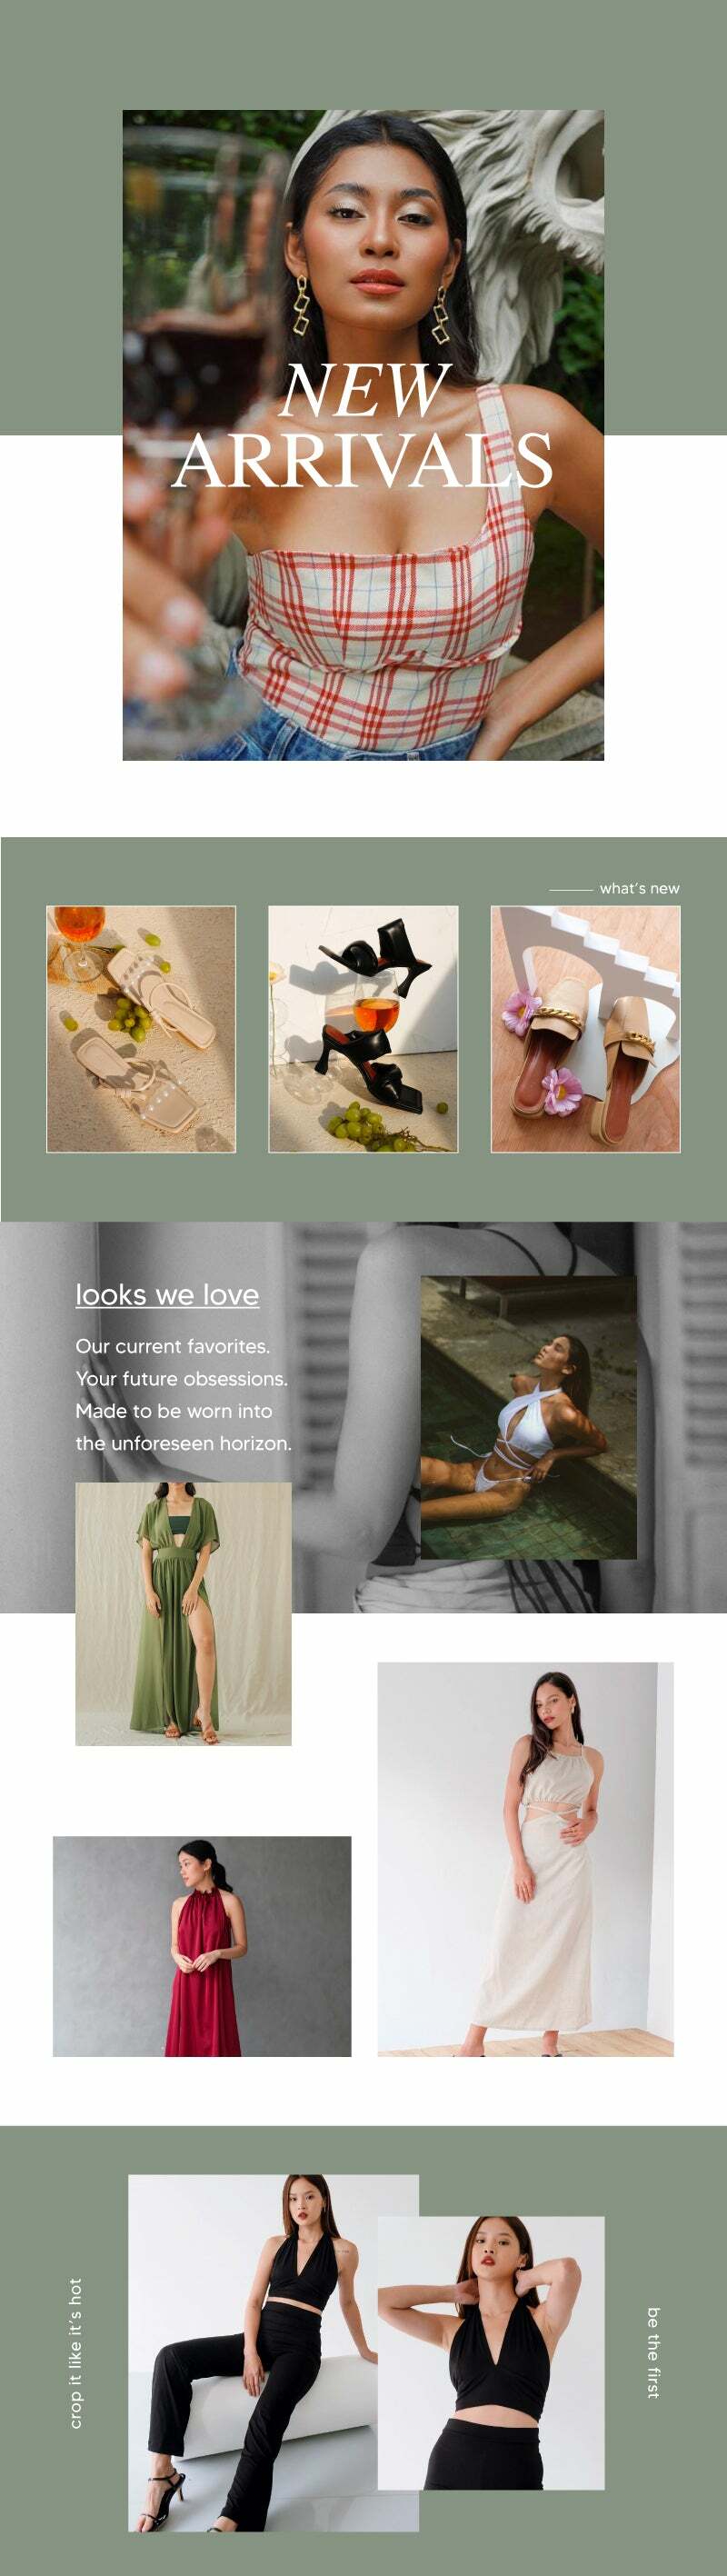  what's new looks We lo ove Our current favorites. Your future obsessions, Made to be worn into. a ss atthe Bea the unforeseen: horizon. crop it like its hot 3S4y ay aq 